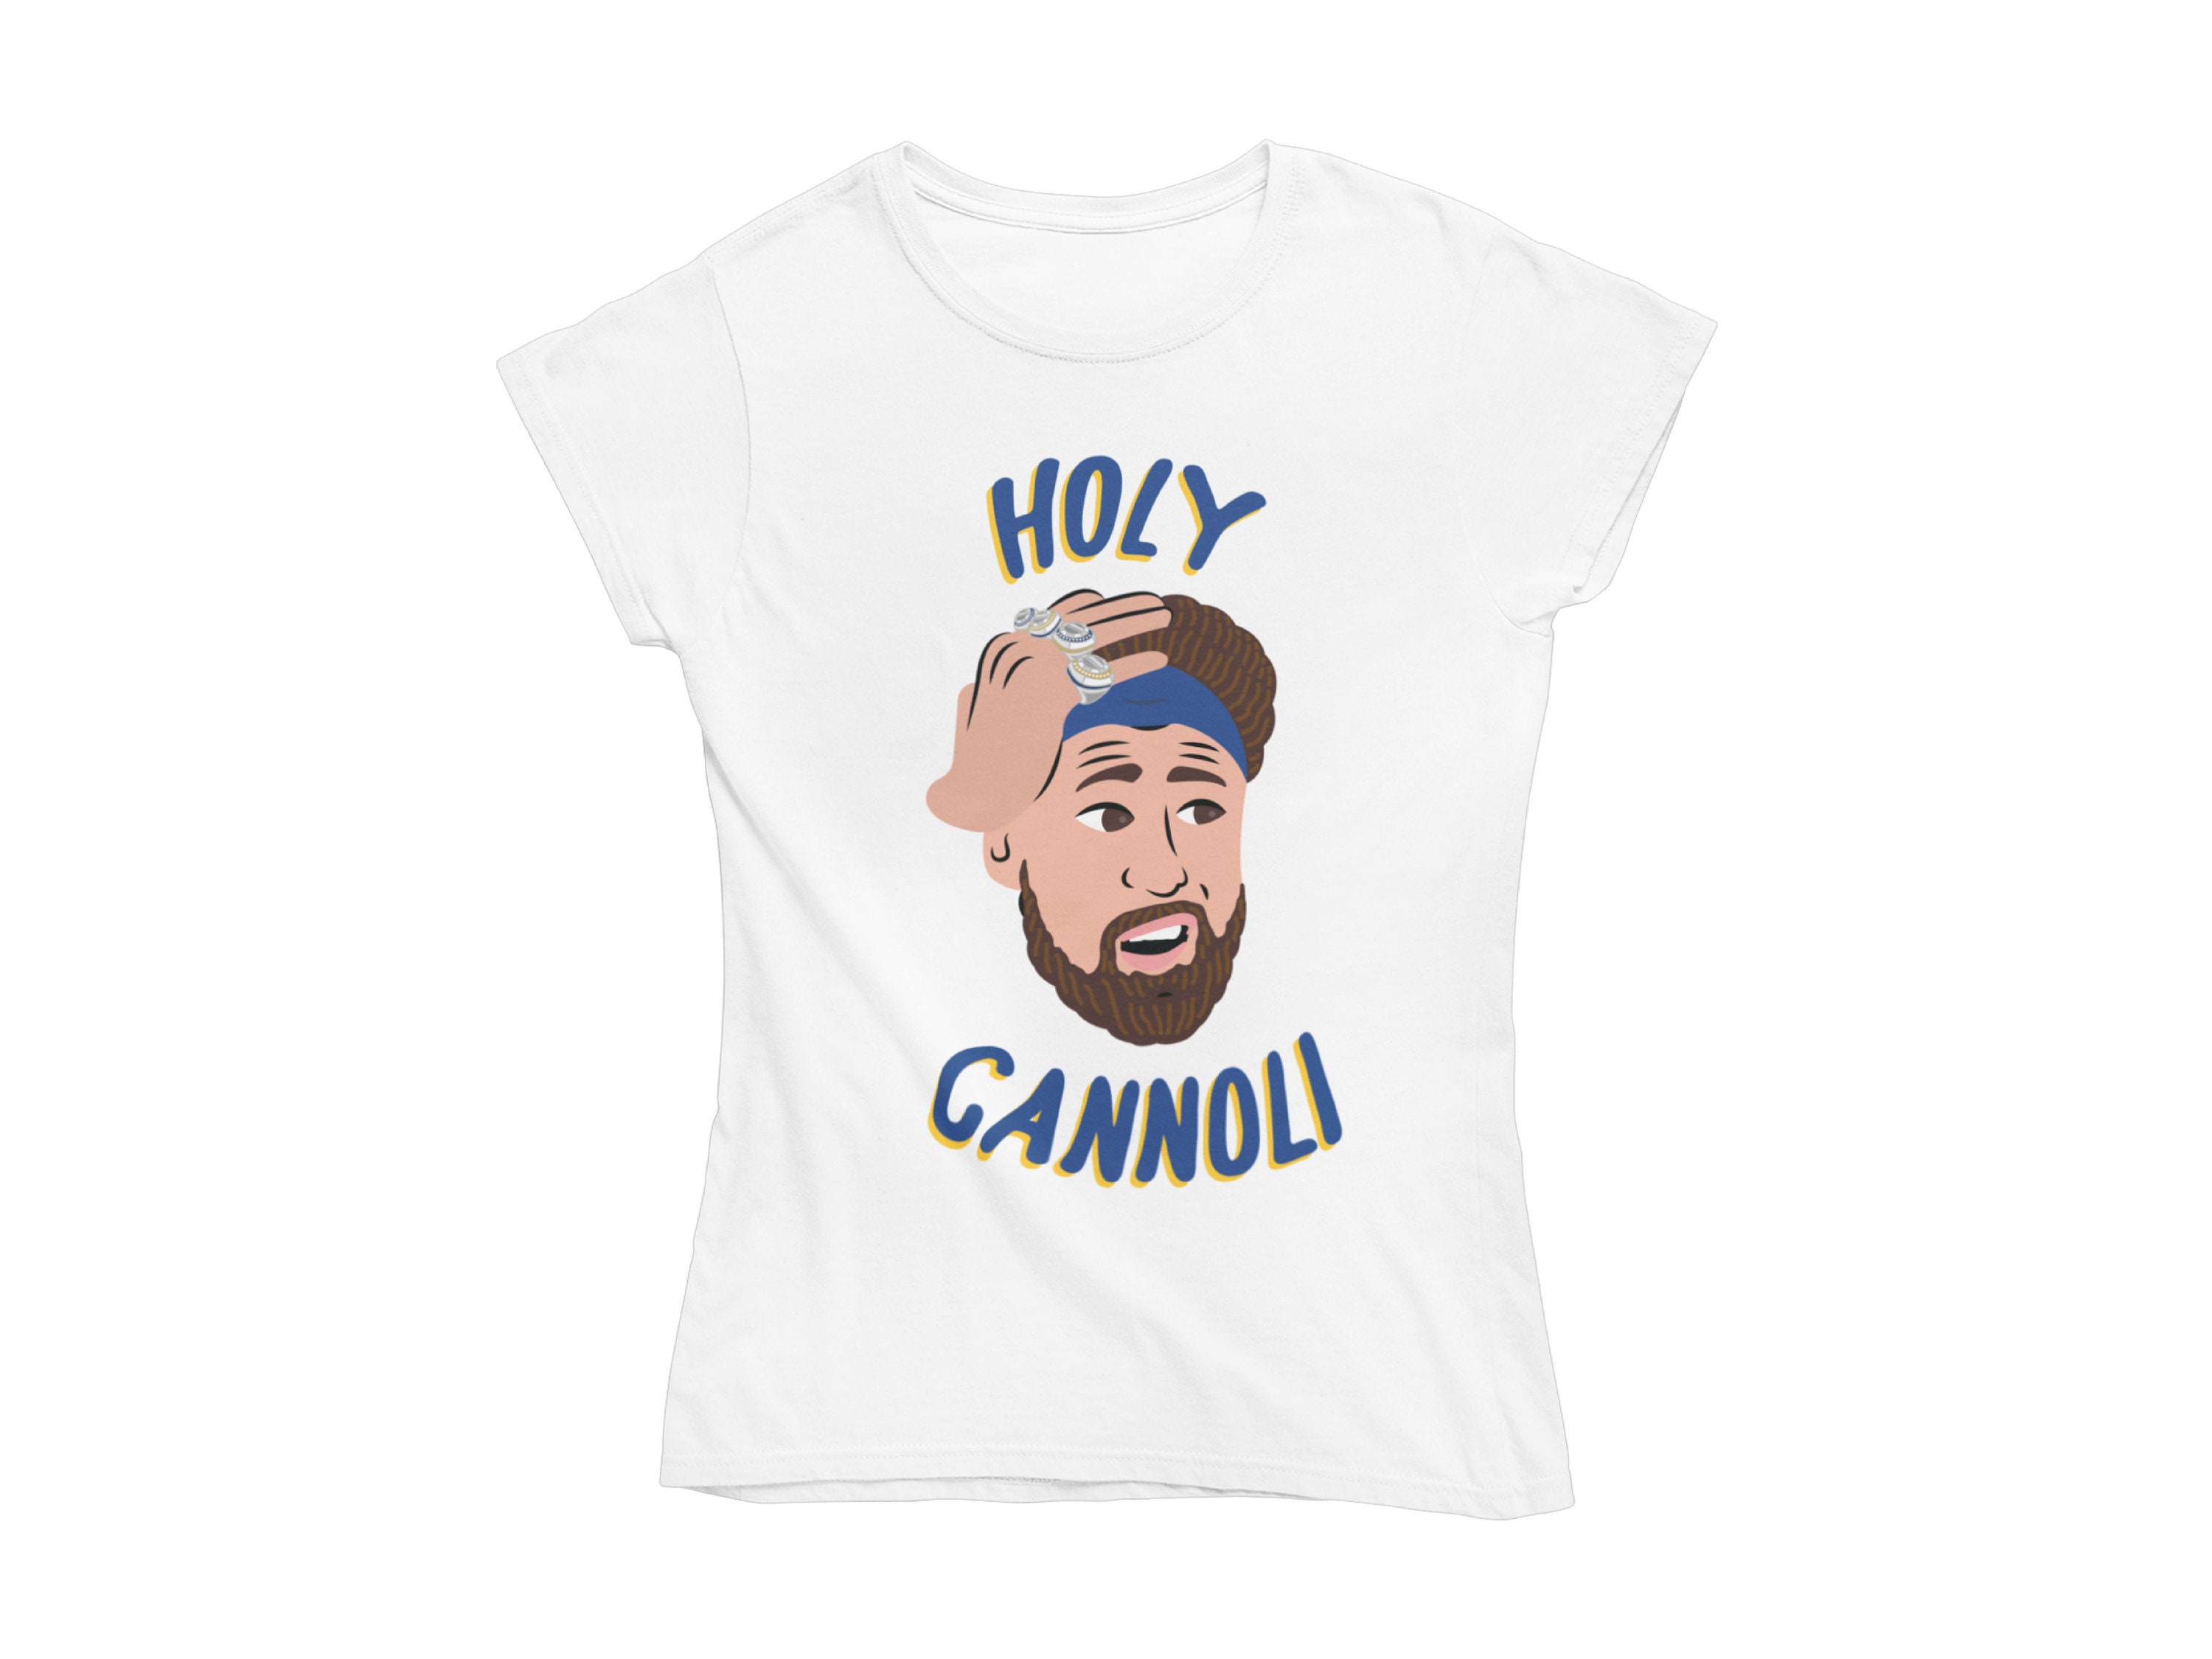 Klay Thompson Holy Cannoli Unisex Shirt For Fans - Trends Bedding